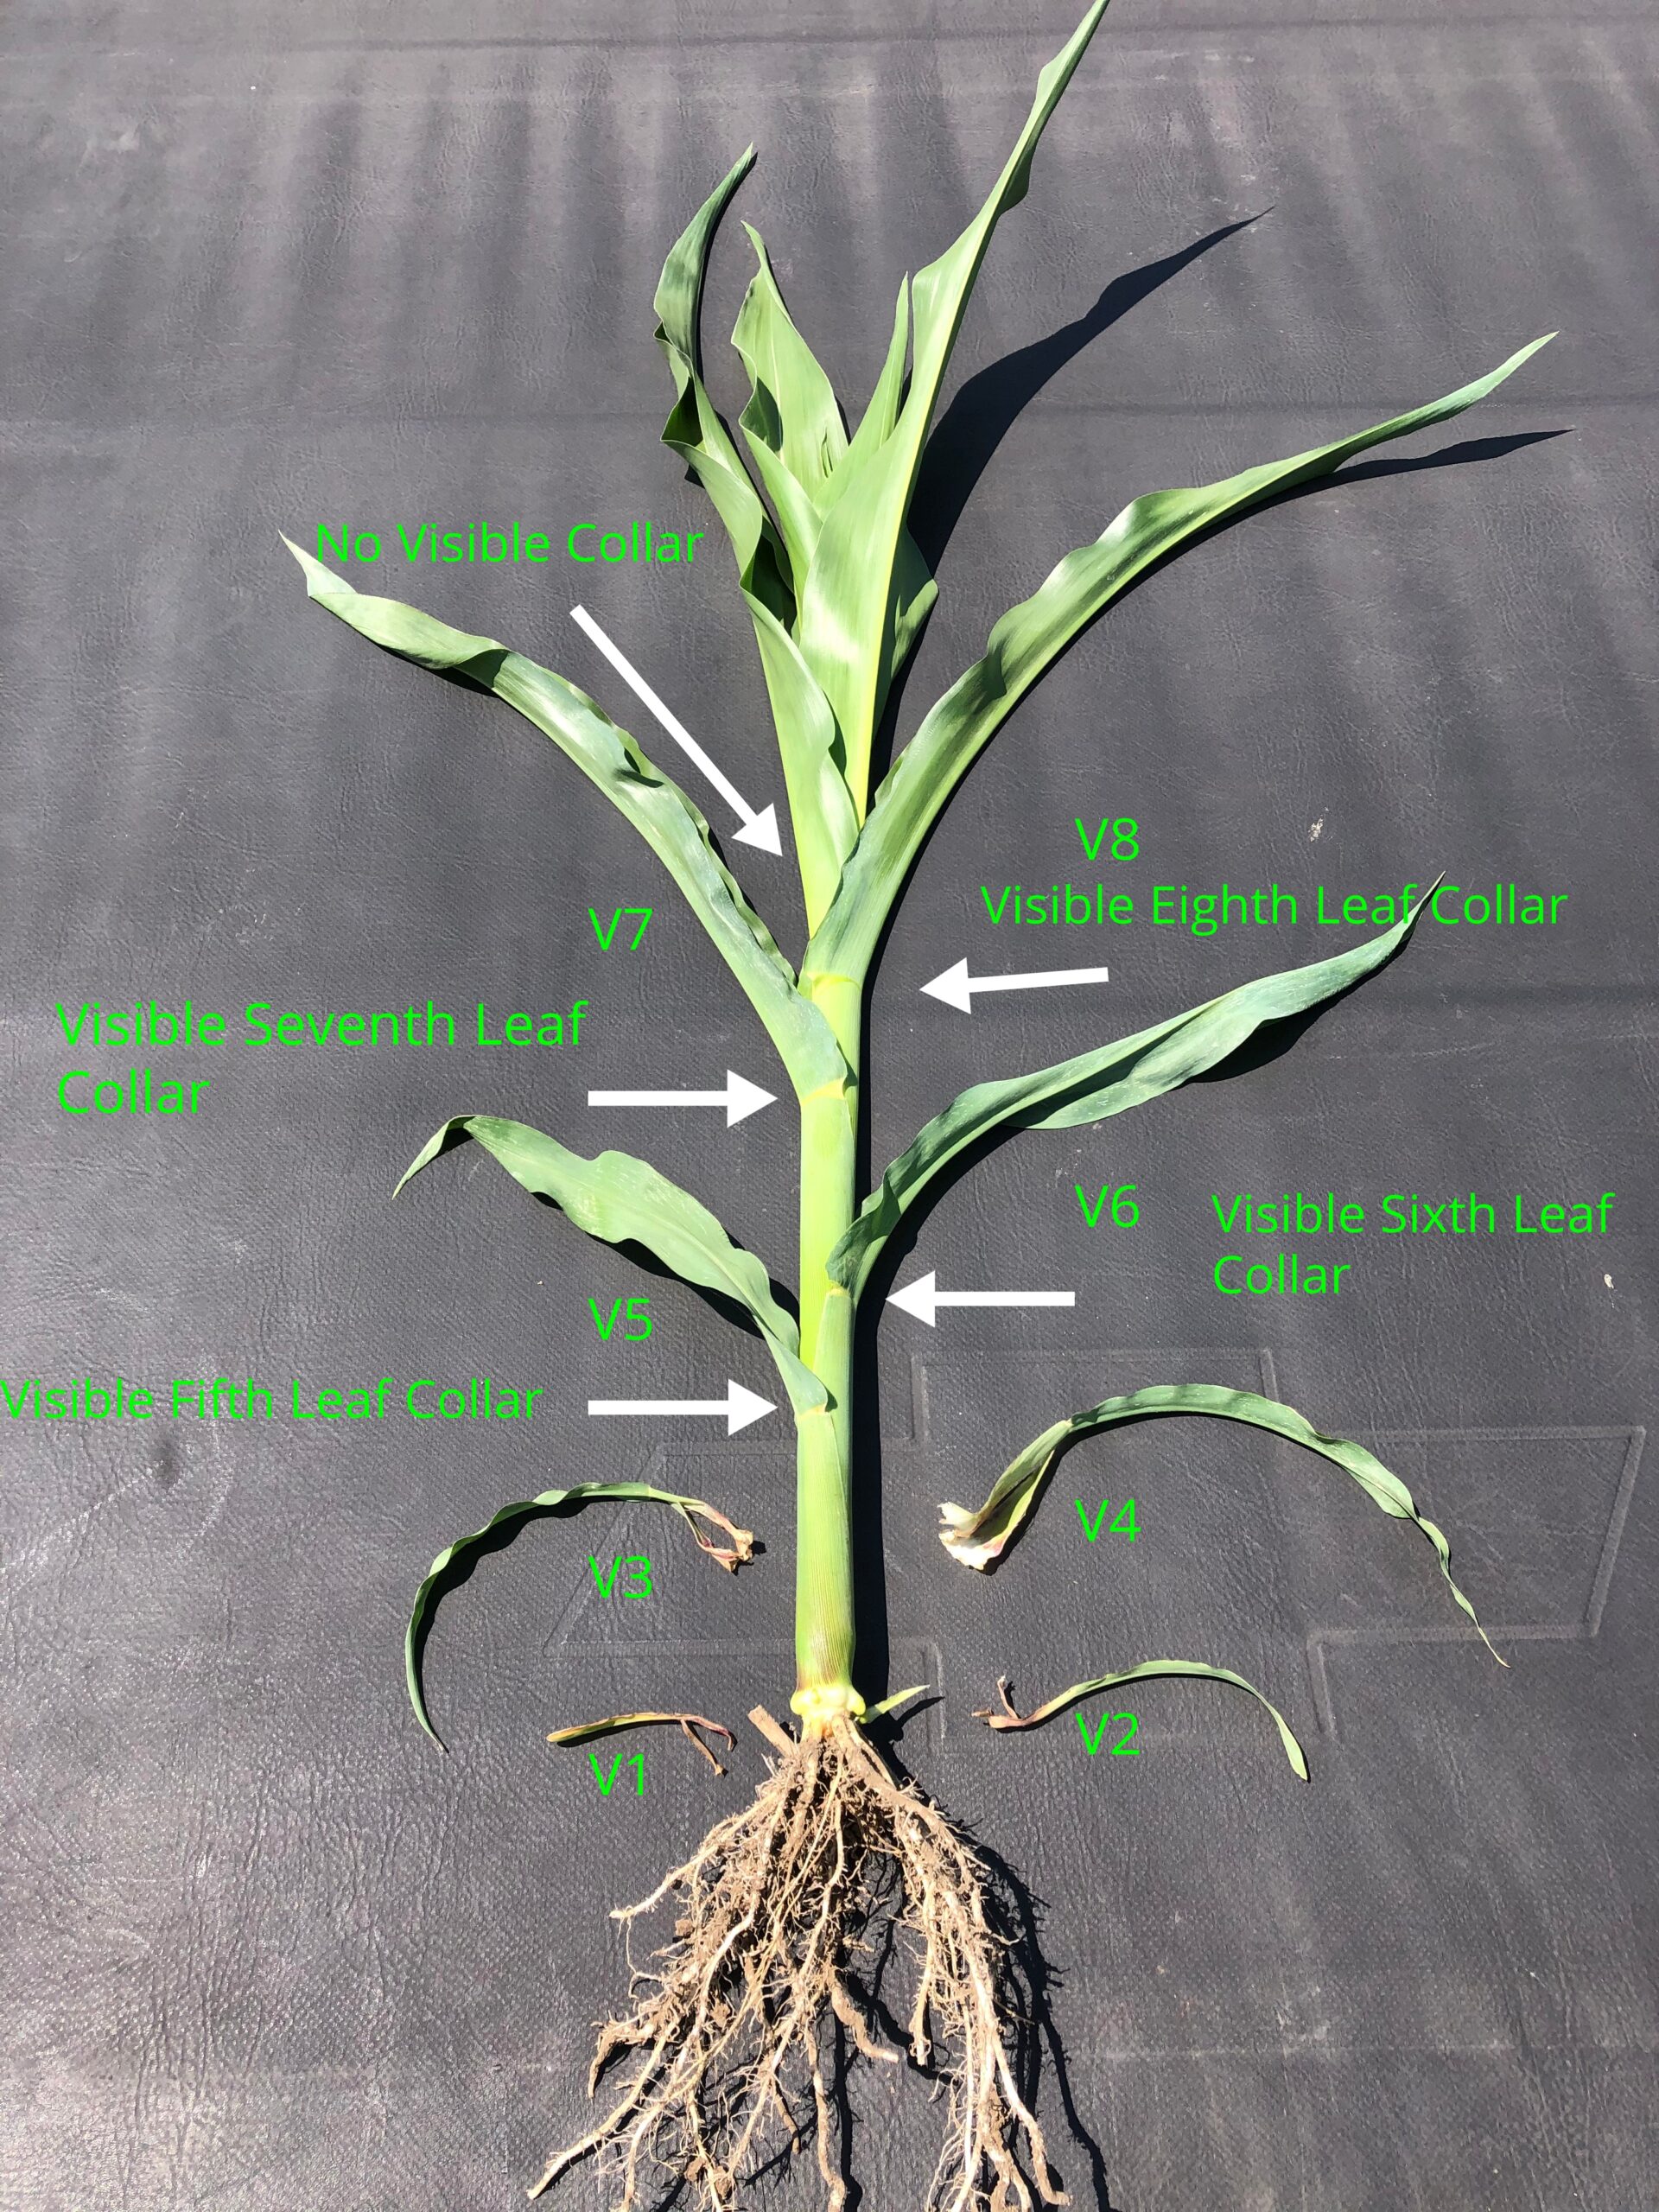 Have You Been Accurately Staging Your Corn Plants in Later Vegetative